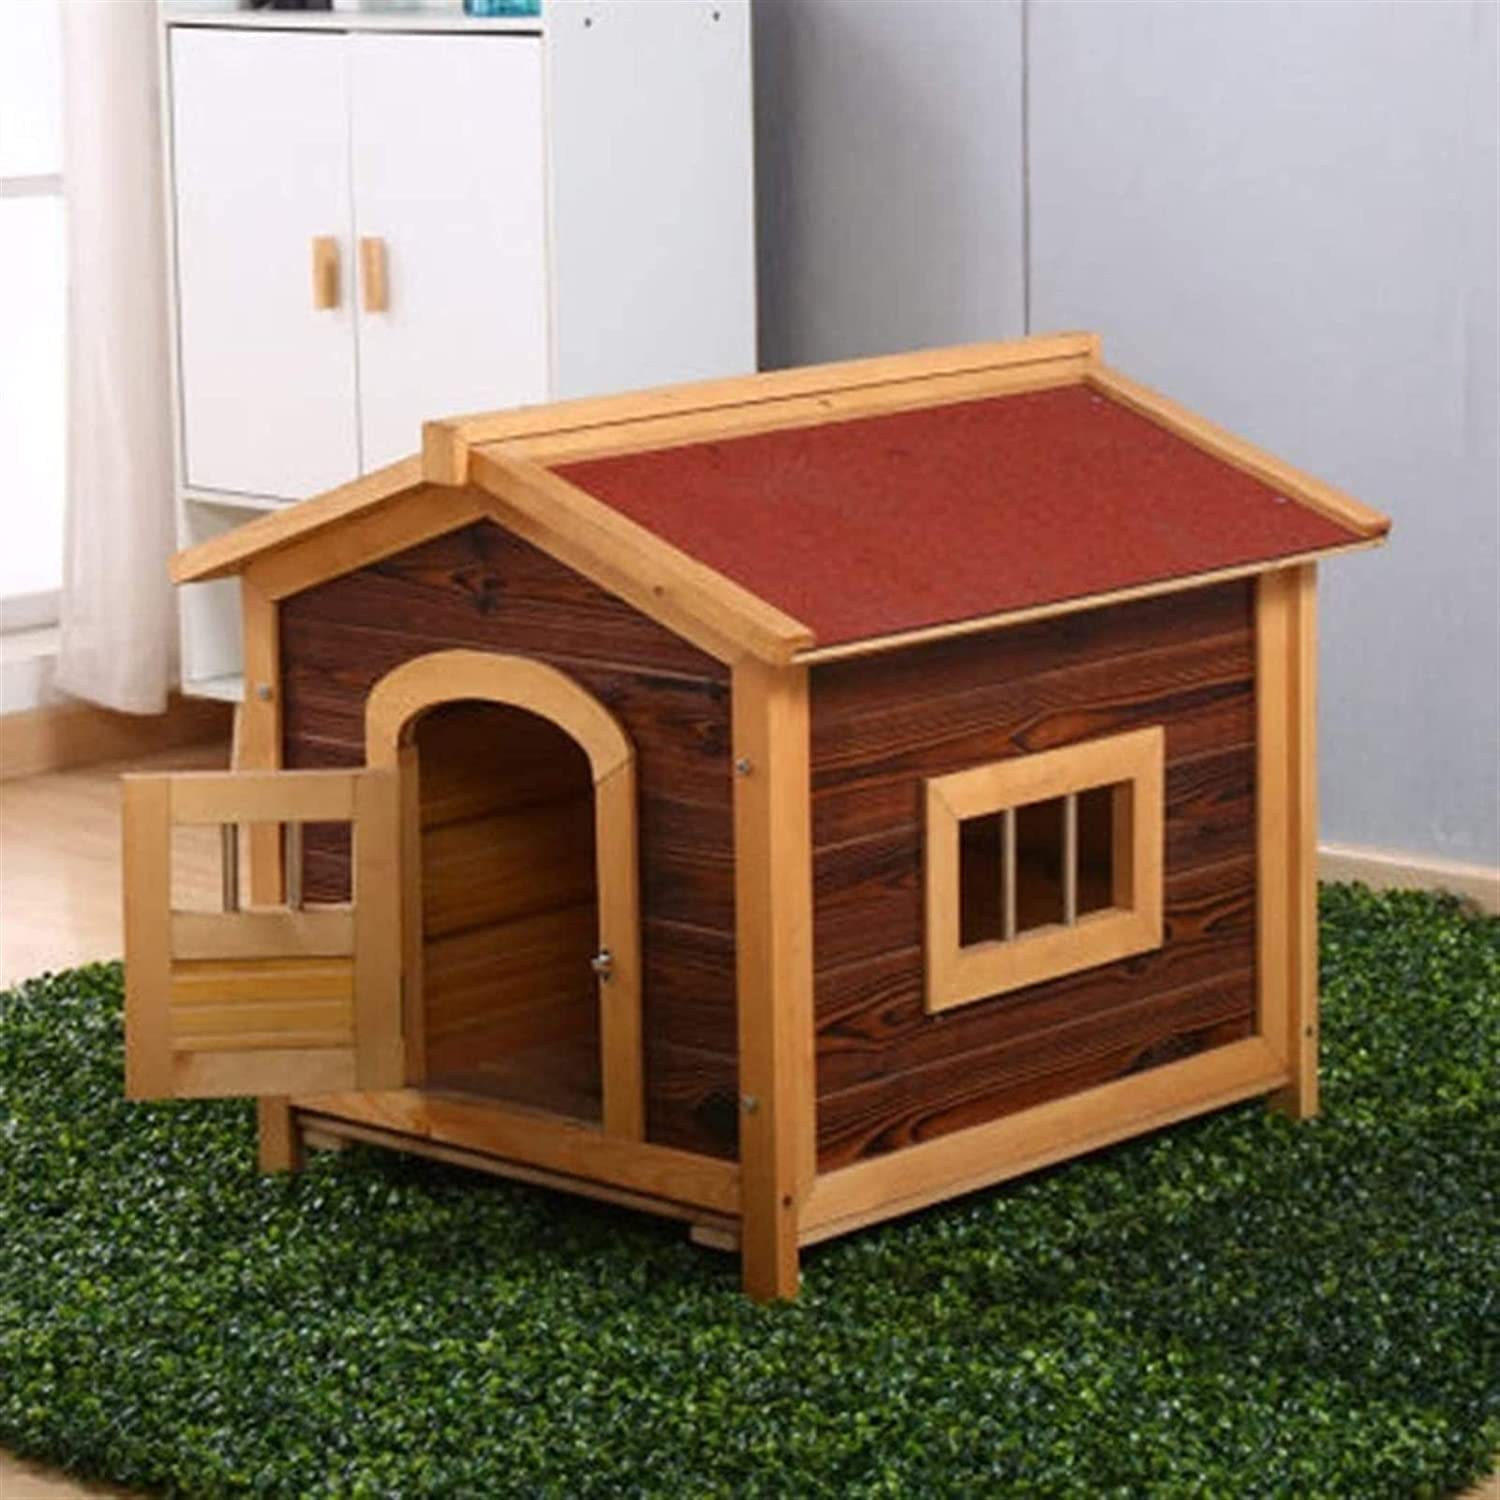 QXWJ Dog House,Wooden Outdoor Pet Log Cabin Kennel,Weather Resistant Waterproof with Door Flap Drawable Base Plate Home Pet Furniture,For Small Medium Large Animals Animals & Pet Supplies > Pet Supplies > Dog Supplies > Dog Houses QXWJ   